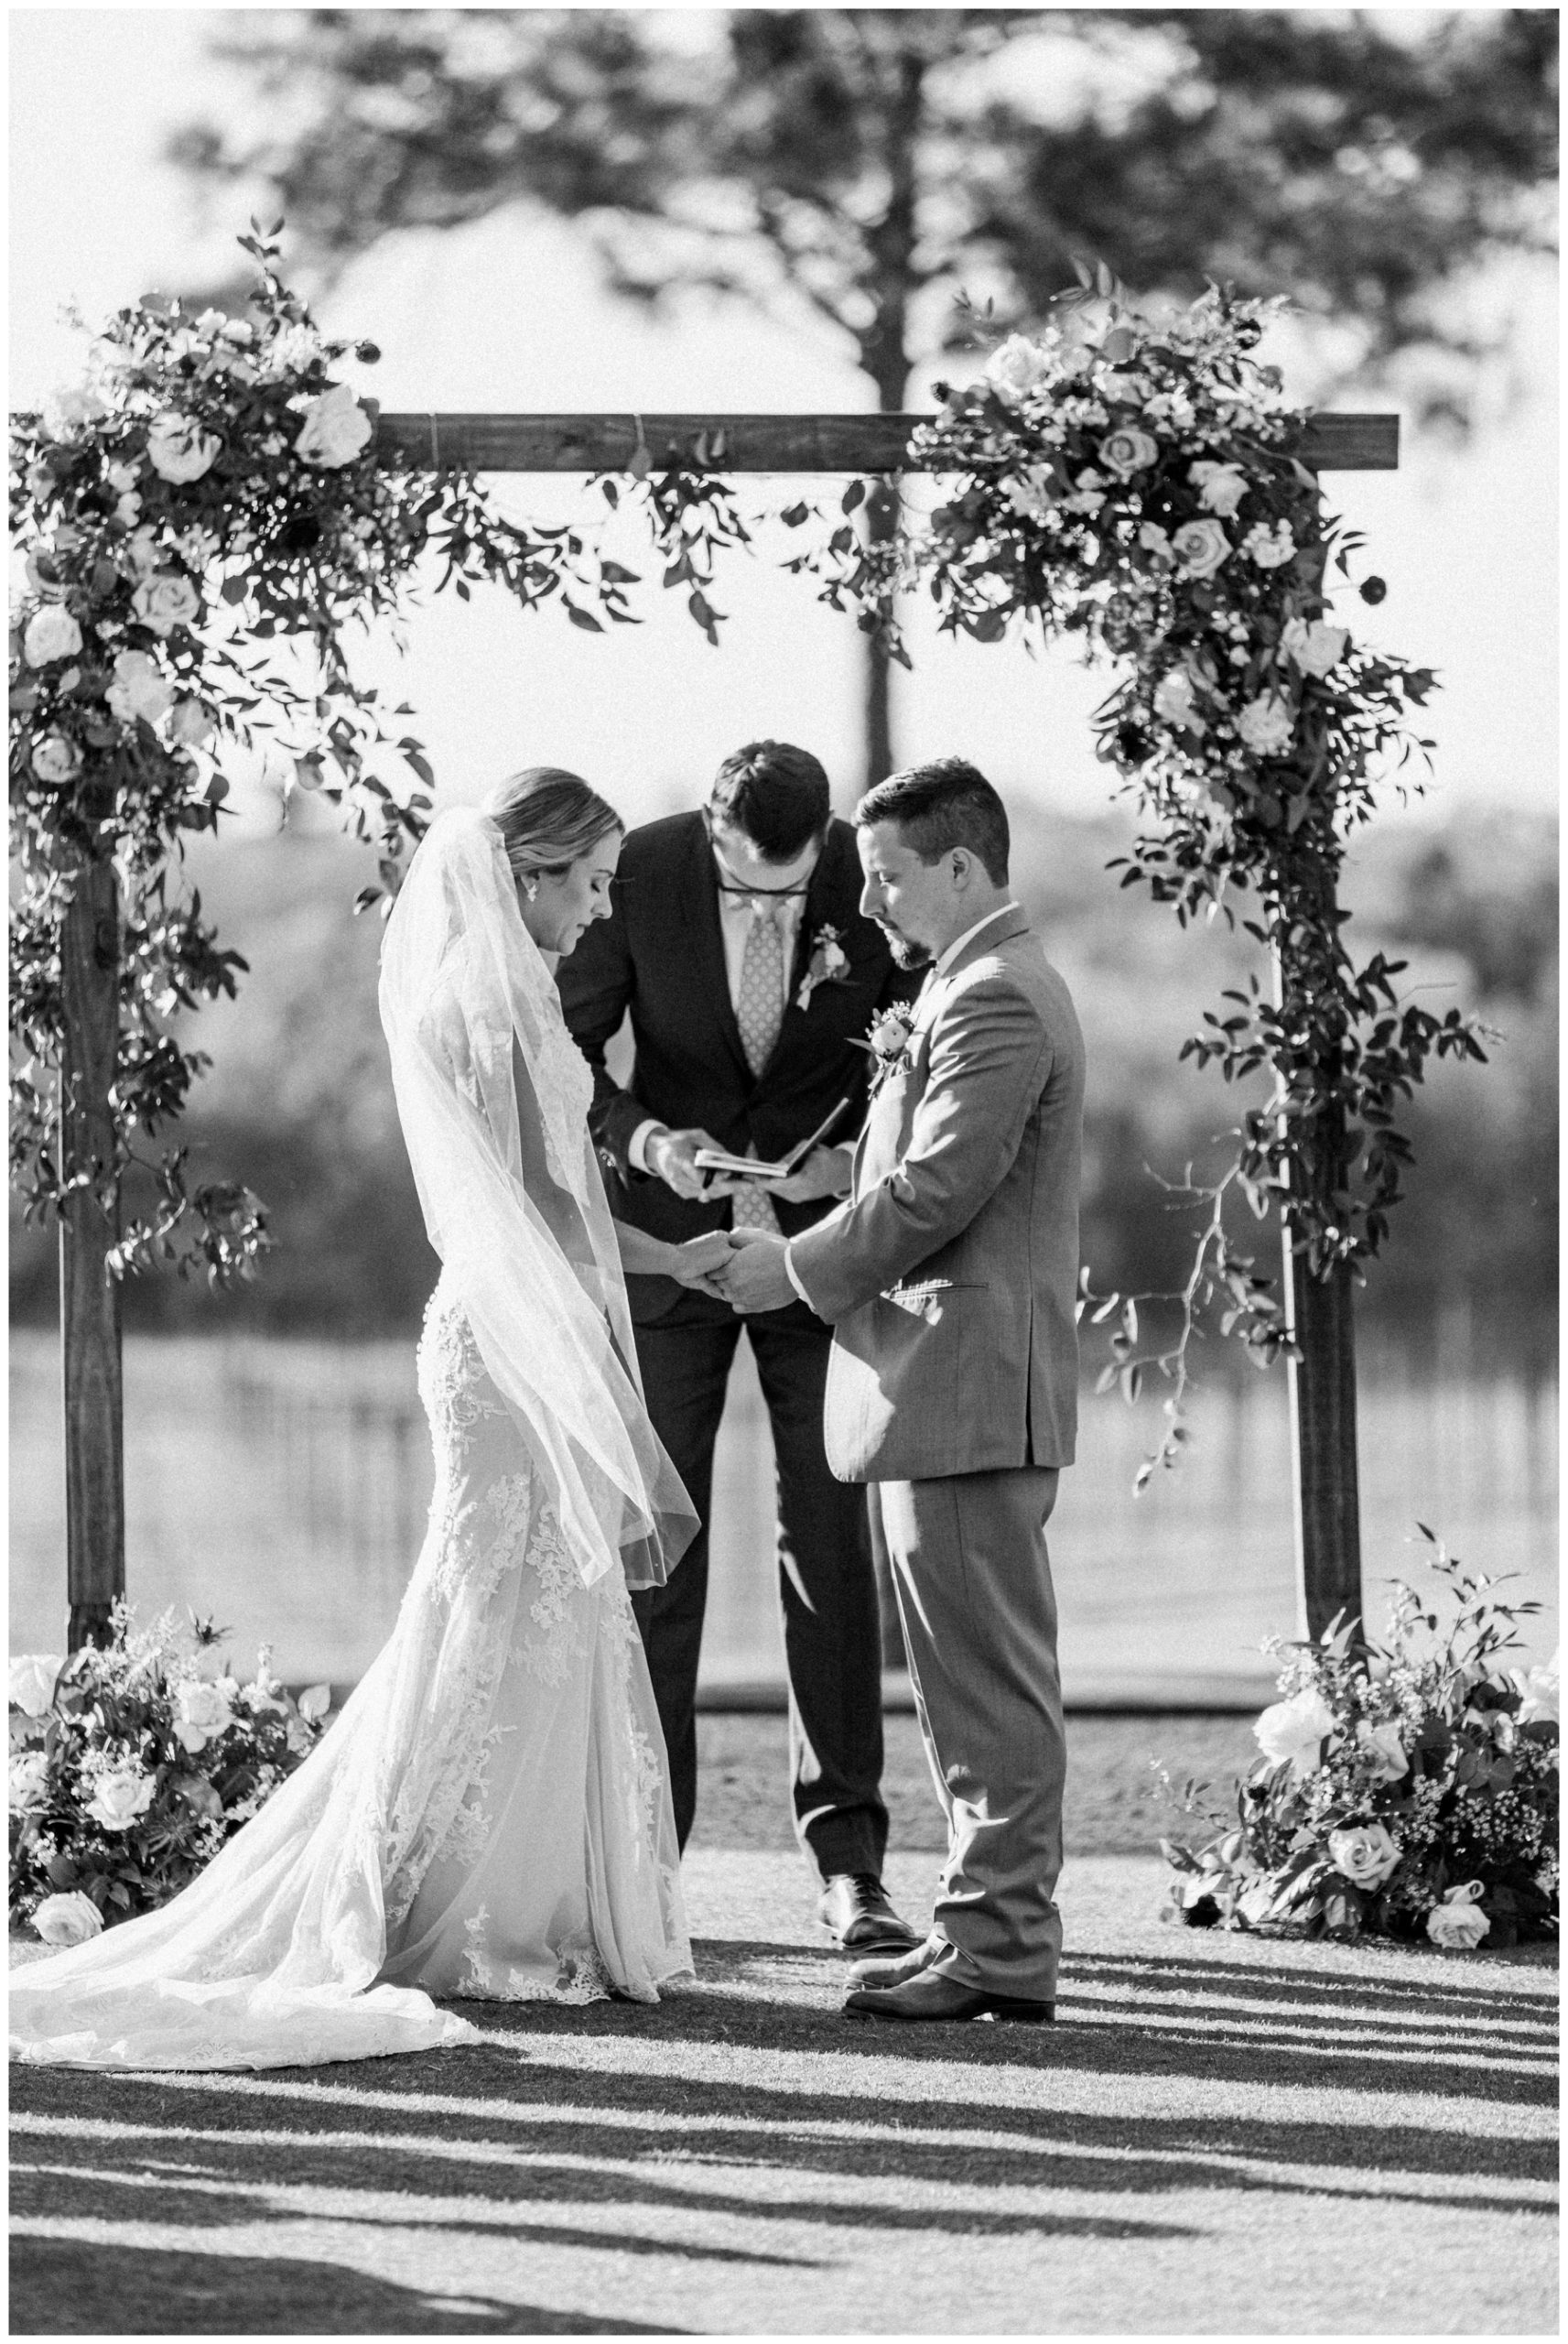 Outdoor wedding ceremony at The Vine on the banks of Brunwine Lake